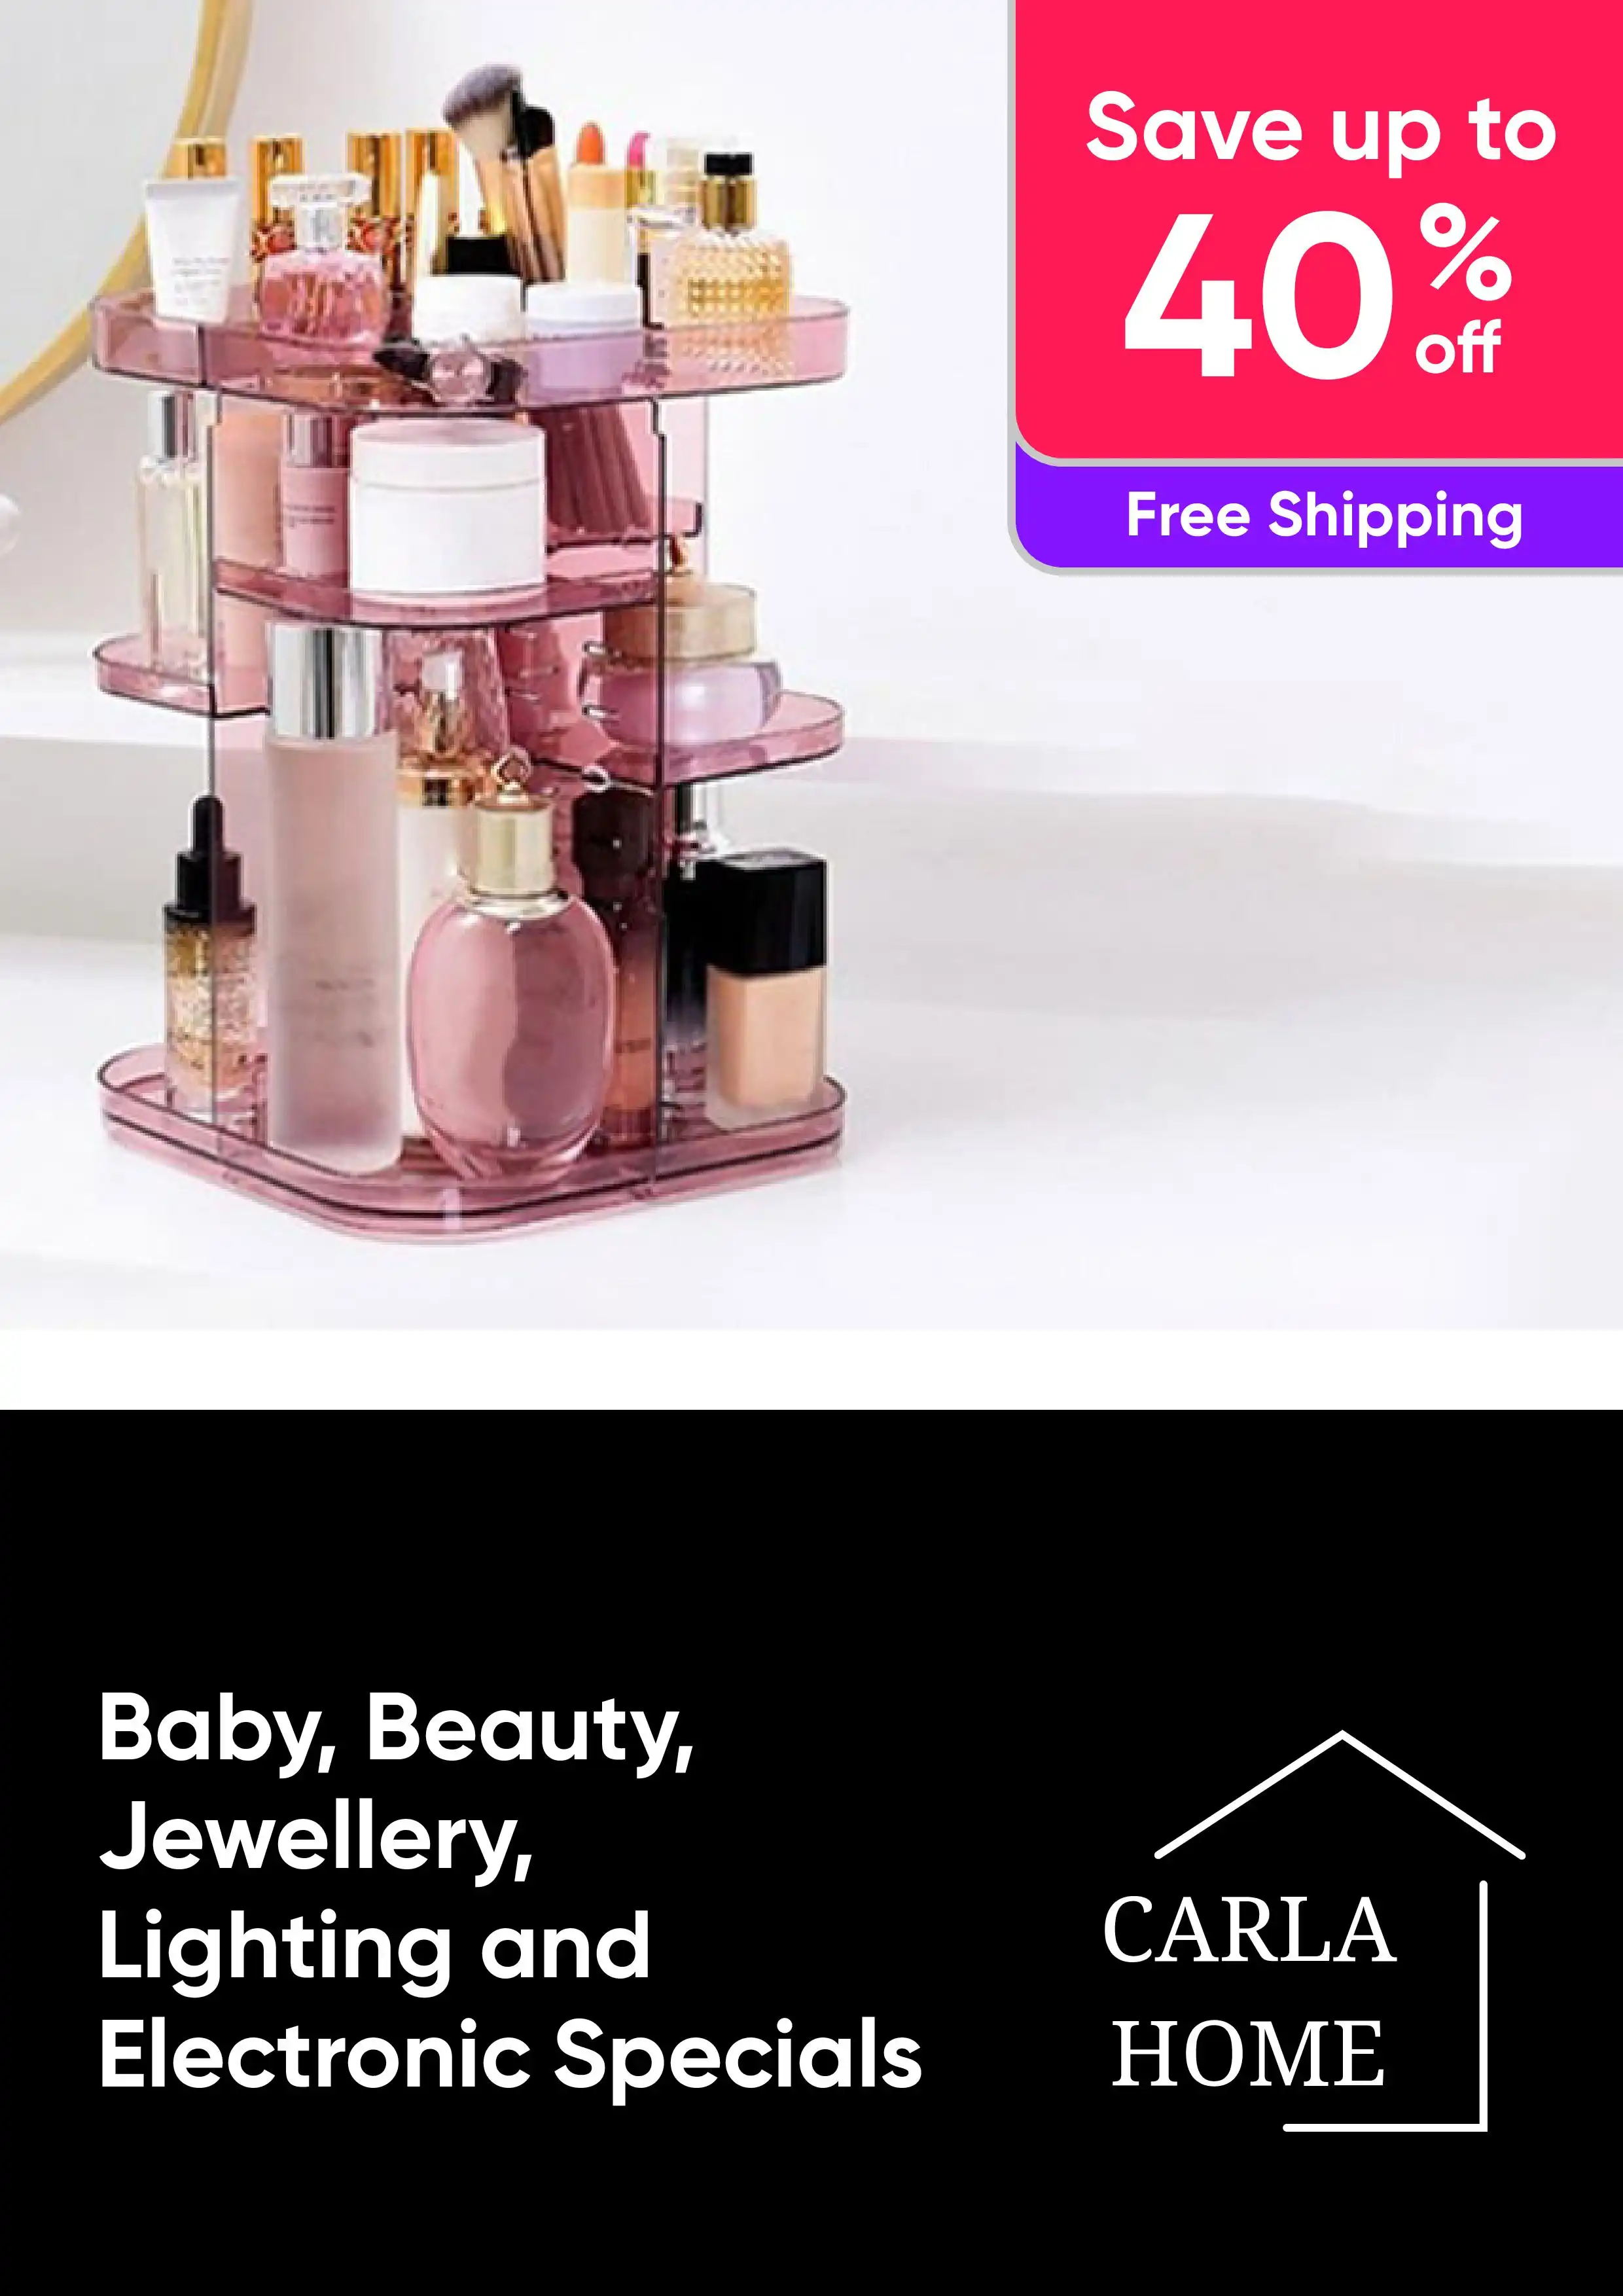 Save Up to 40% Off RRP On a Range of Baby, Beauty, Jewellery, Lighting and Electronics